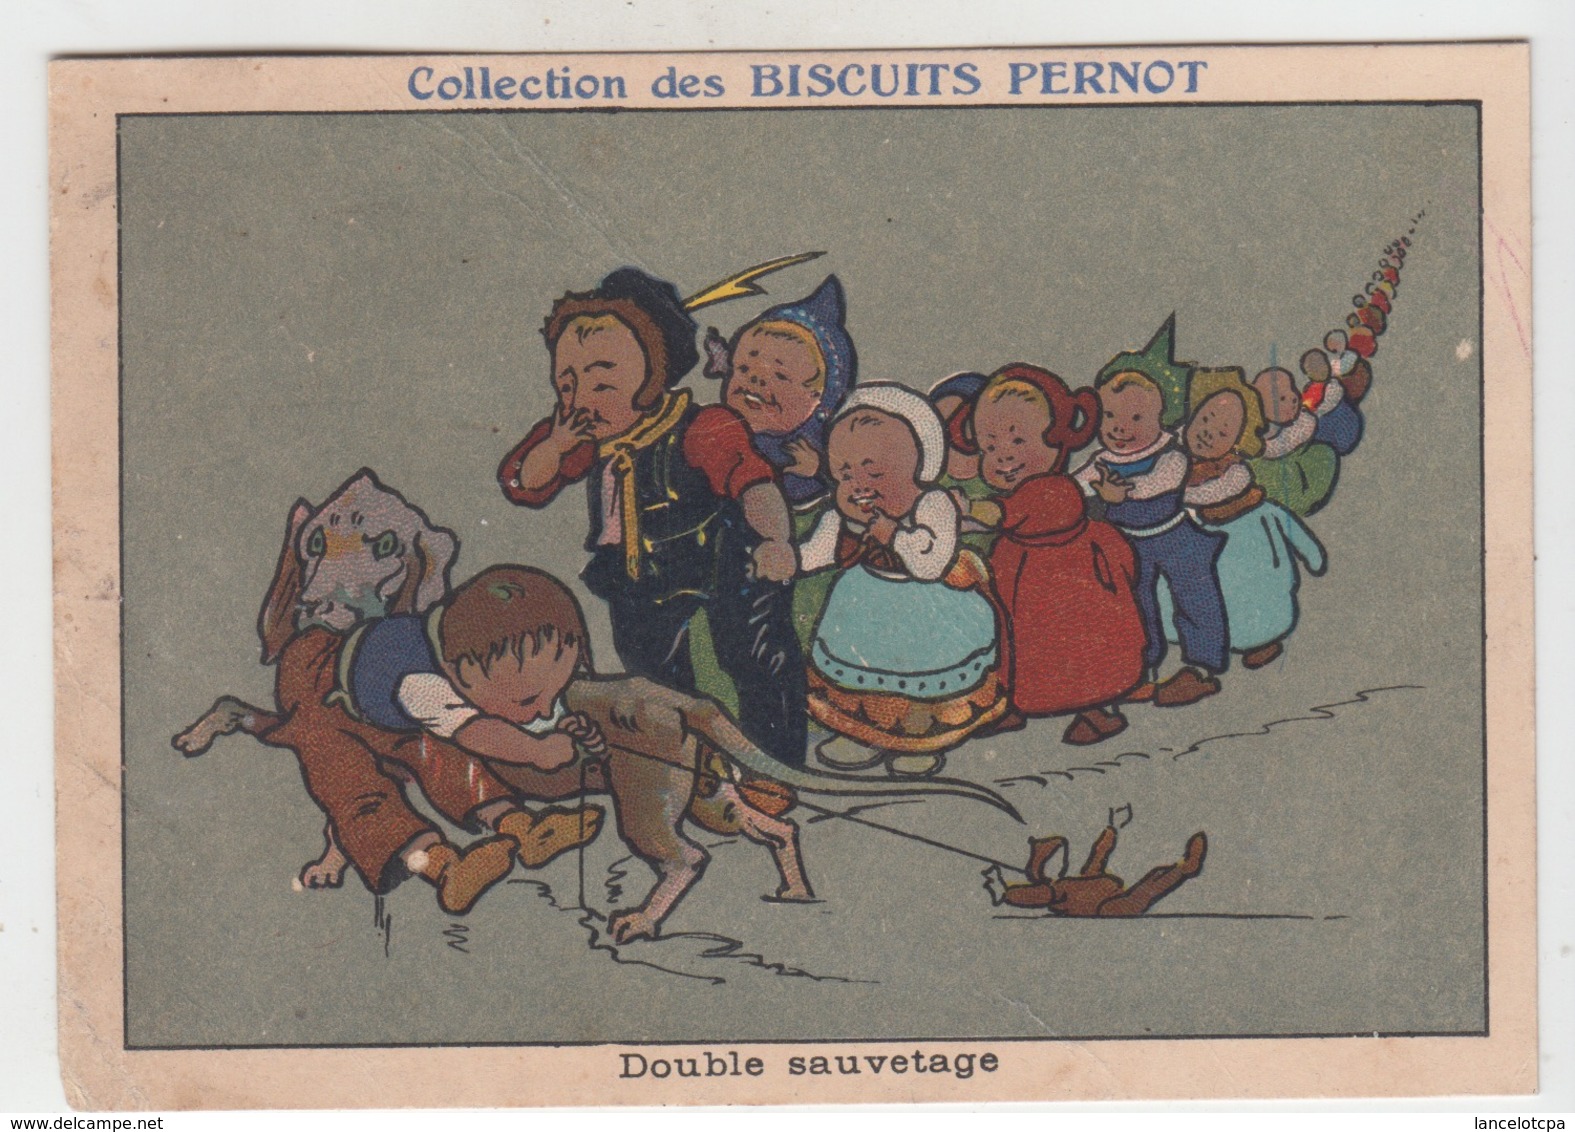 COLLECTION DES BISCUITS PERNOD / DOUBLE SAUVETAGE - Pernot